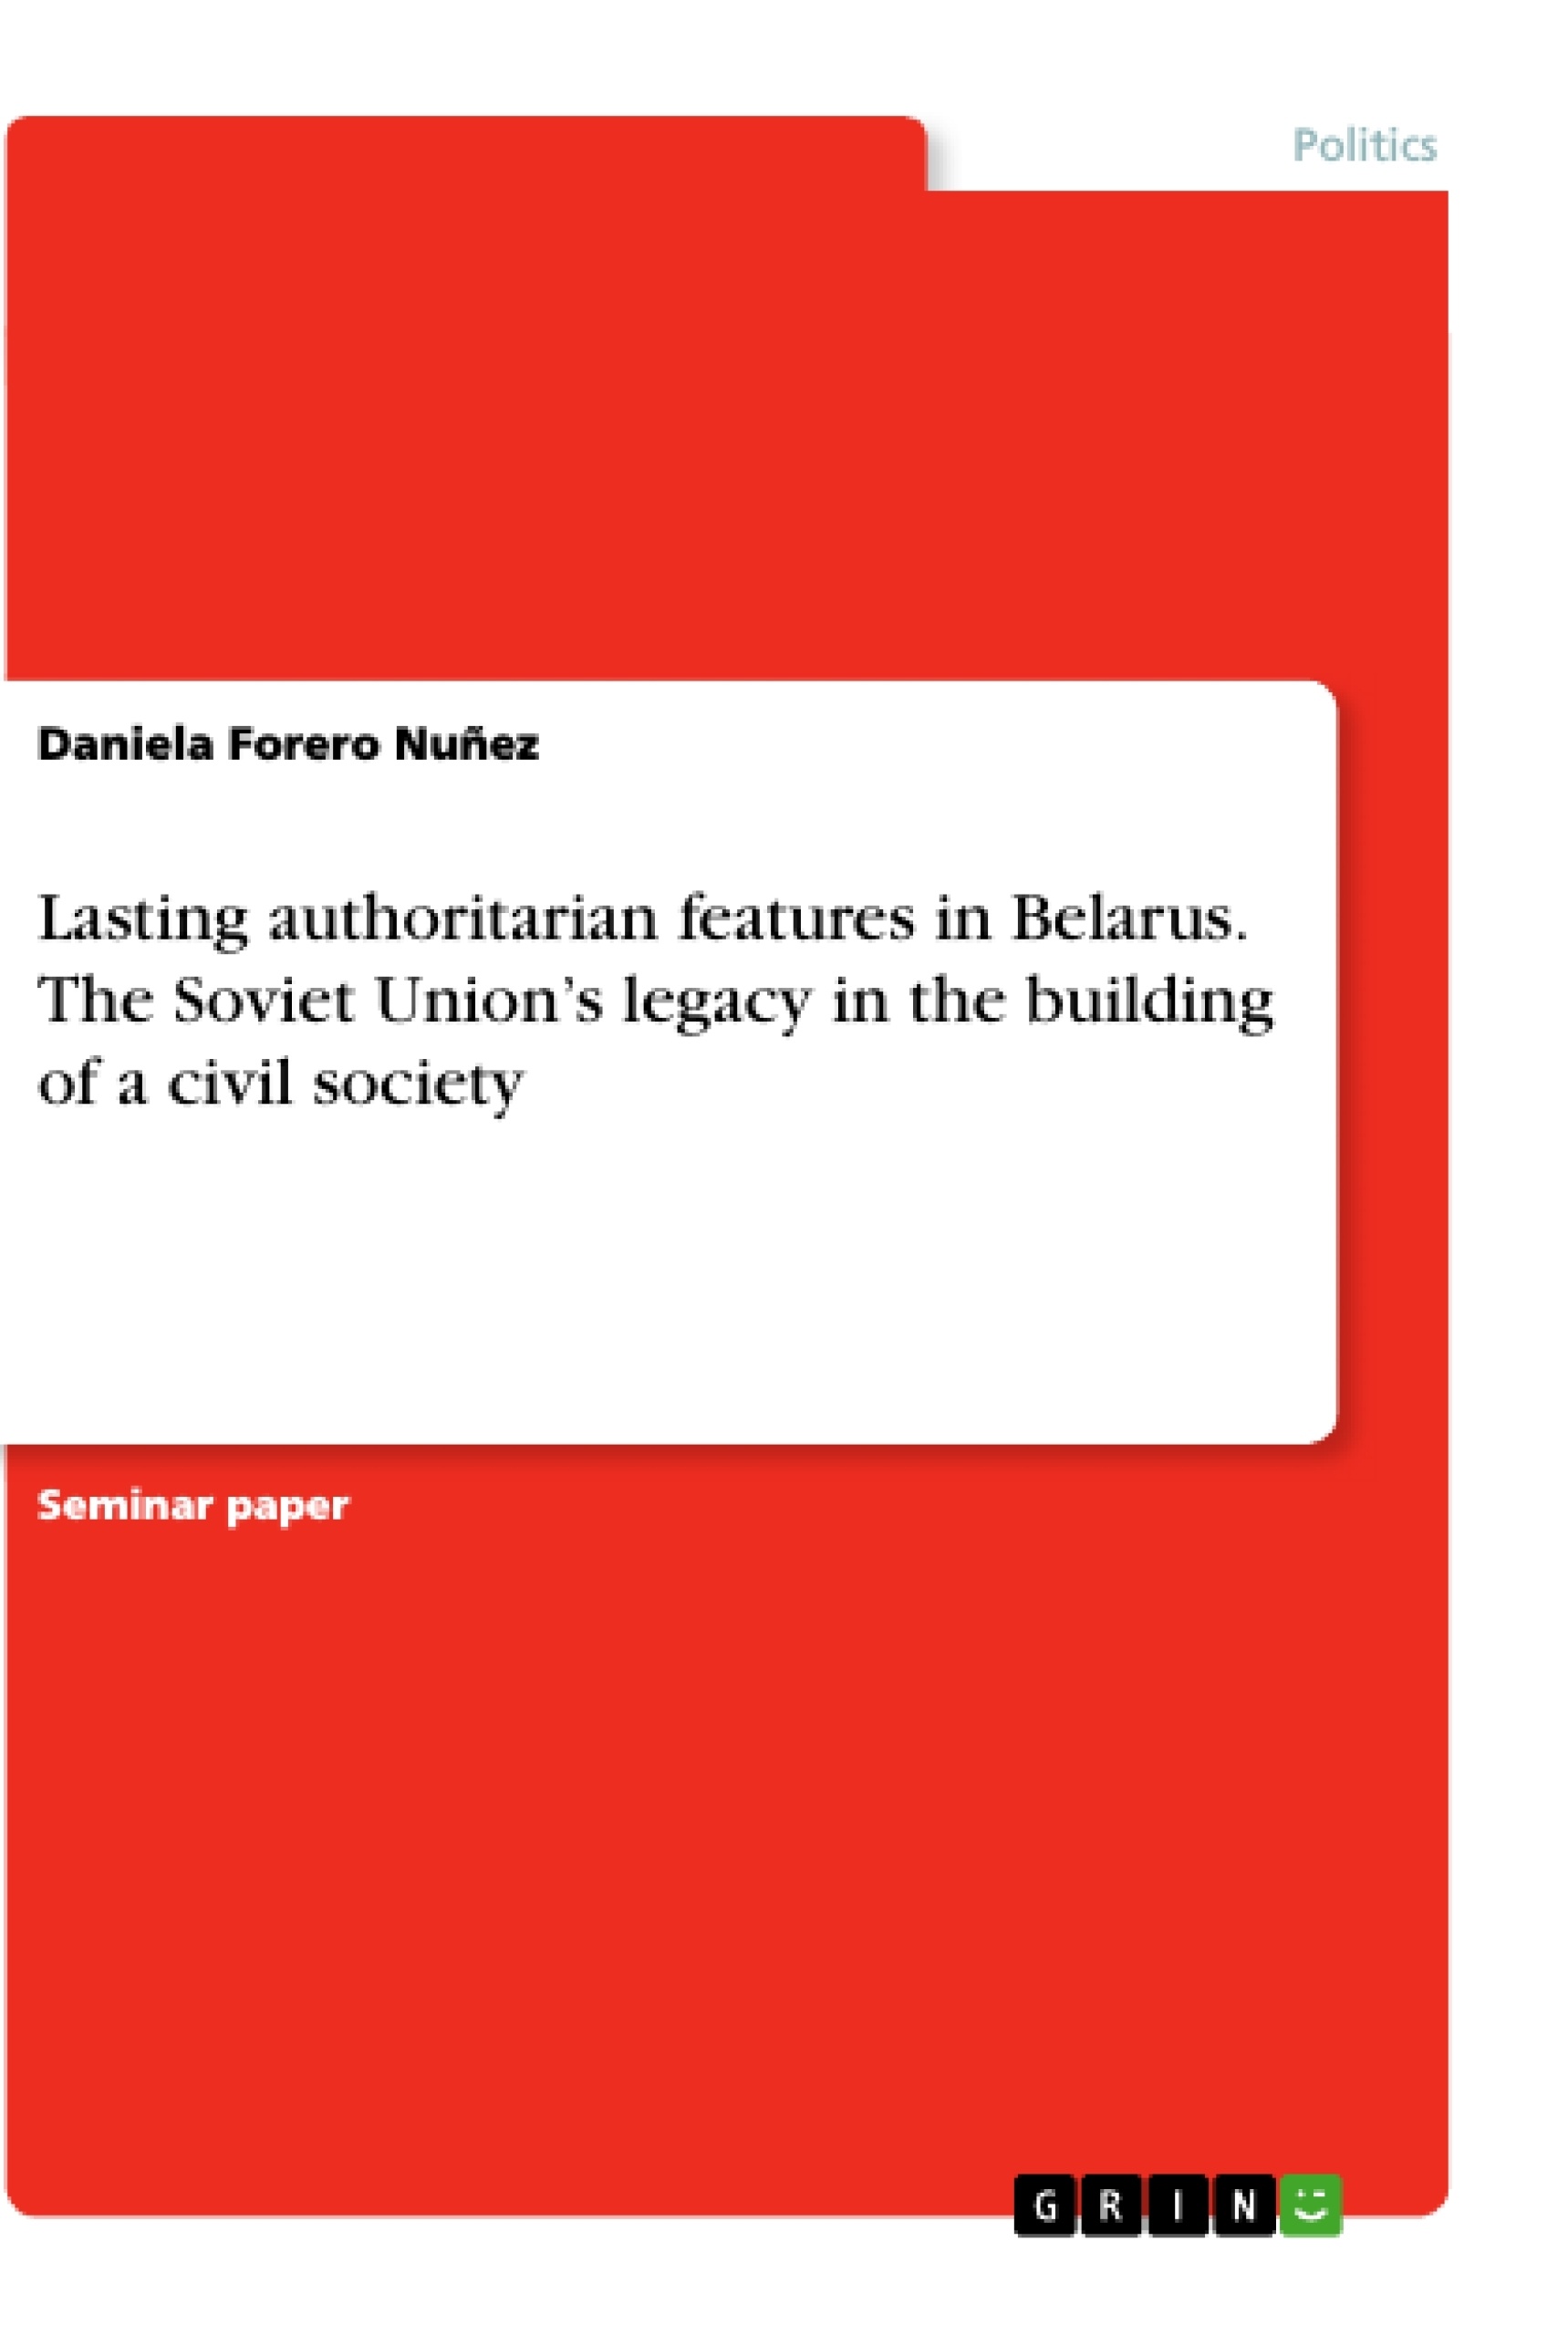 Title: Lasting authoritarian features in Belarus. The Soviet Union’s legacy in the building of a civil society